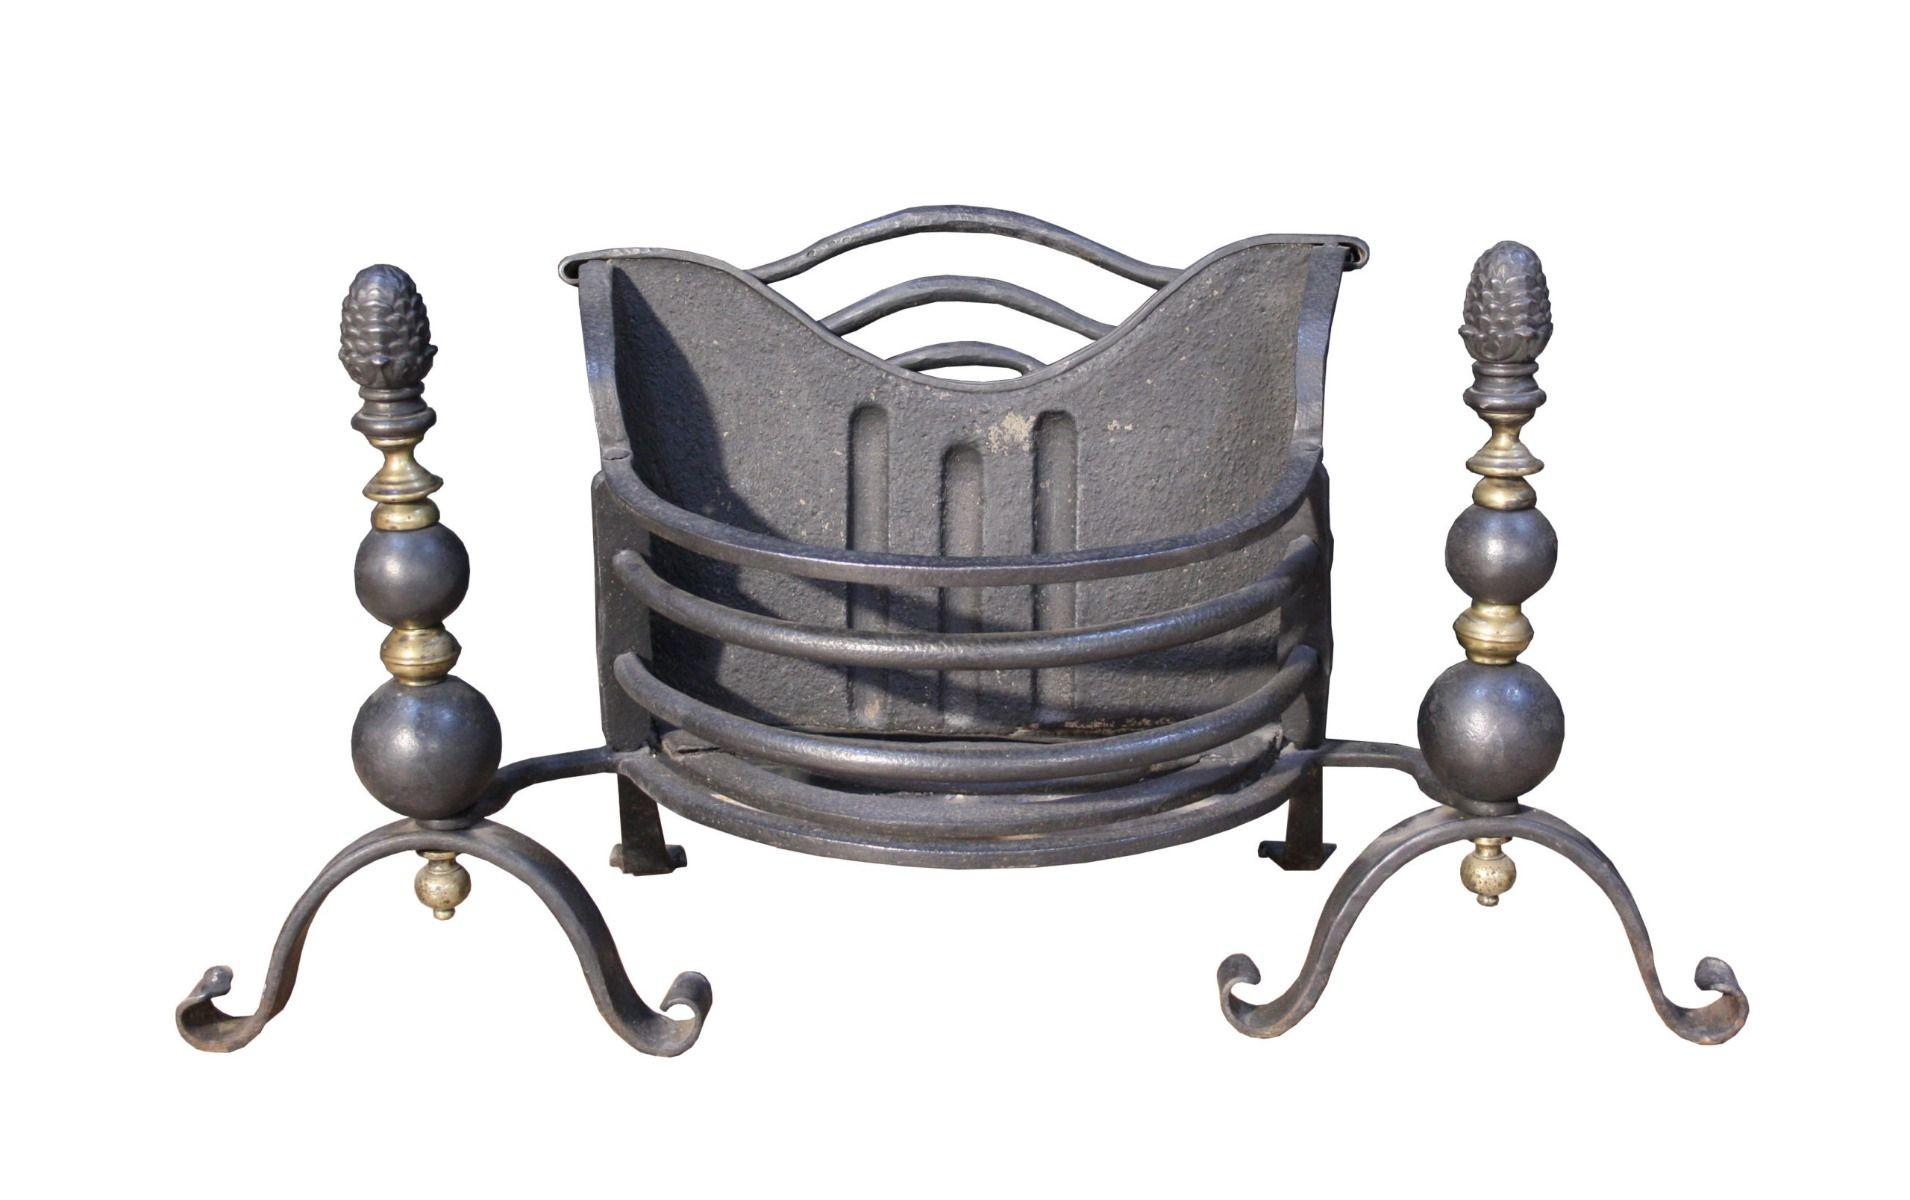 An English brass, wrought and cast iron fire grate in the Victorian style.